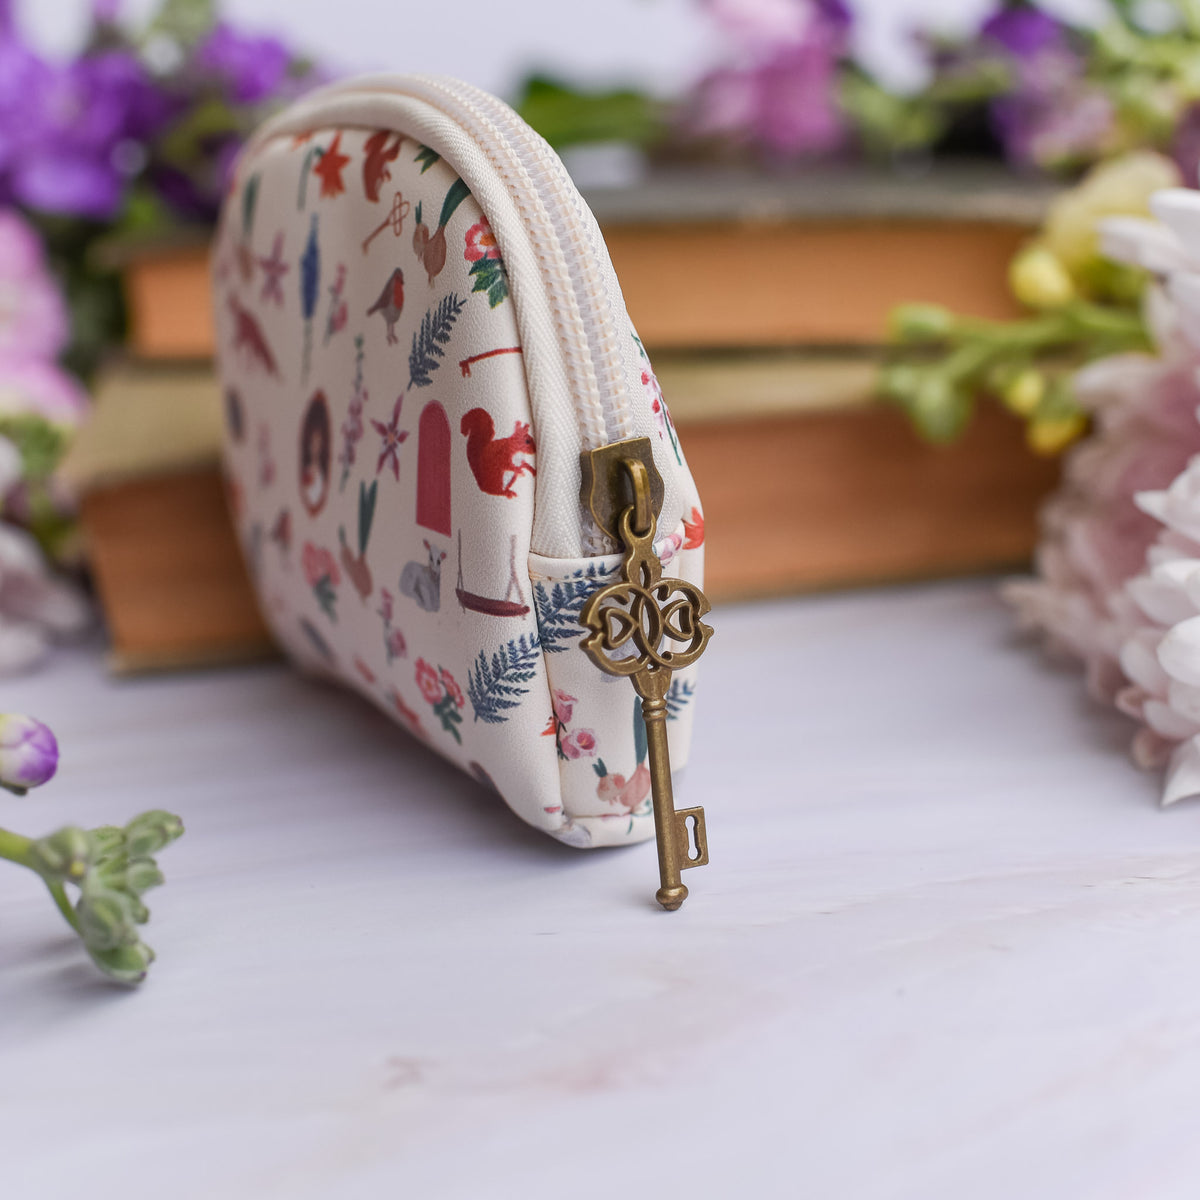 The Secret Garden Coin Pouch with key zipper pull and a pattern that includes a robin, key, flowers, door, squirrel, fox, and nest.